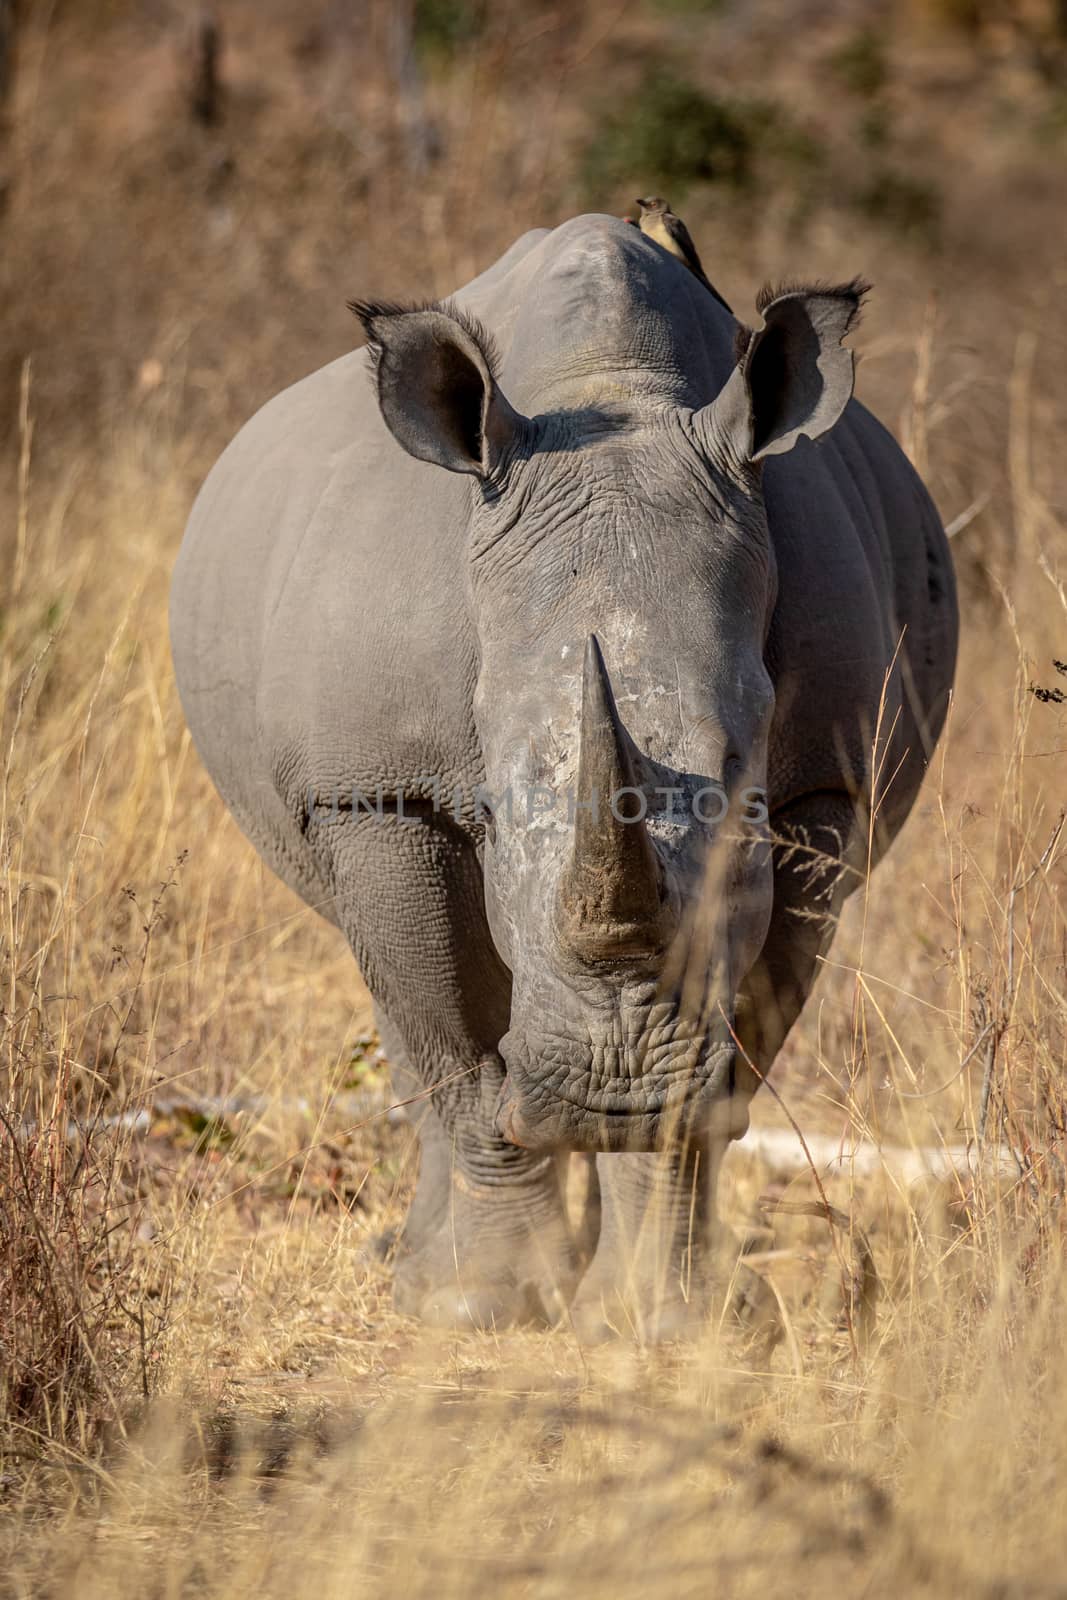 White rhino starring at the camera. by Simoneemanphotography